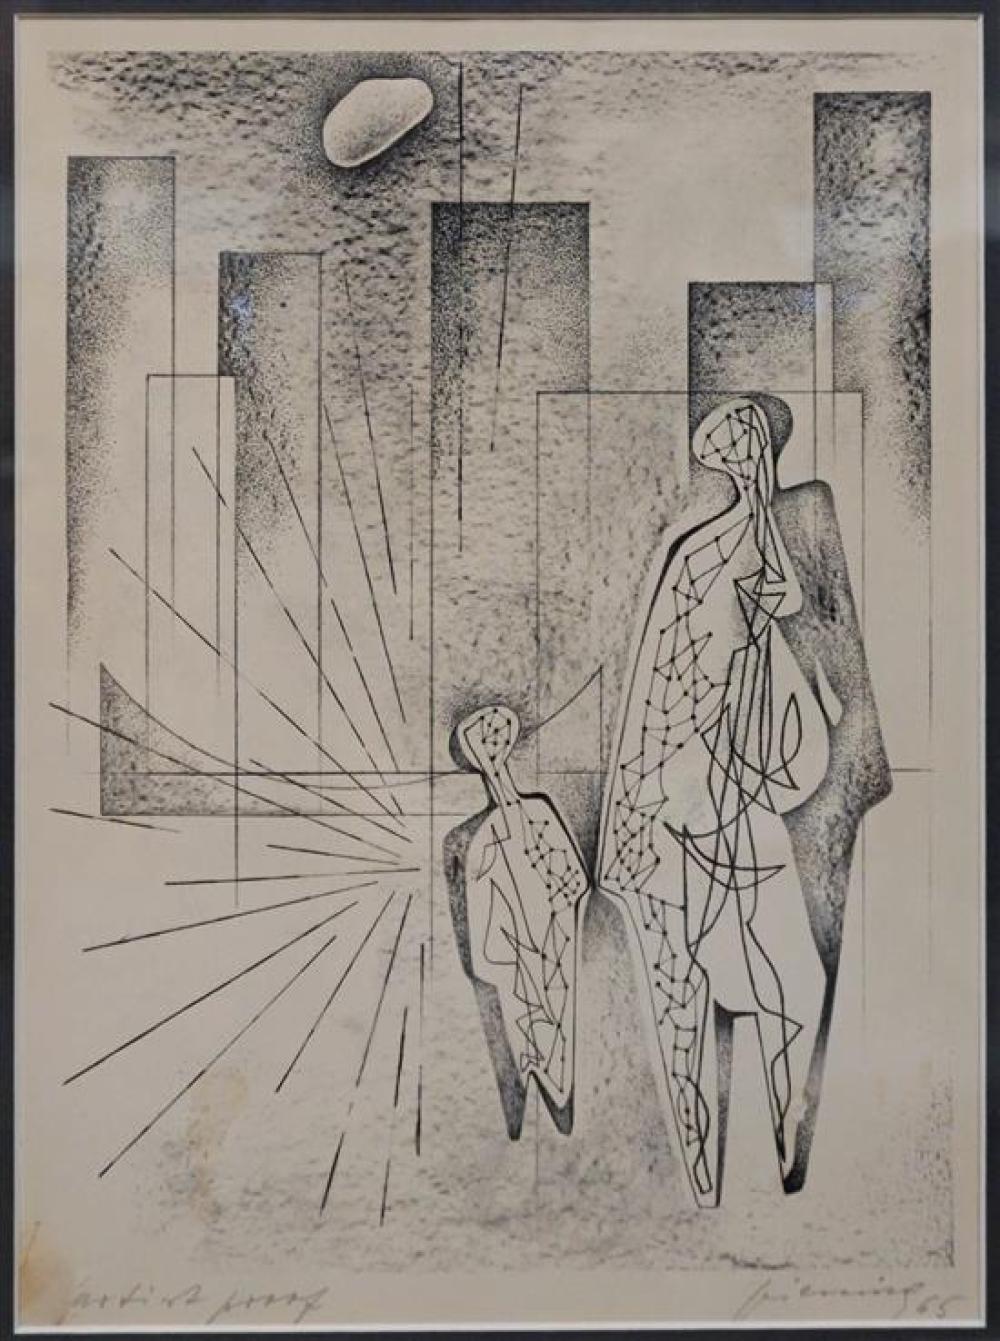 ABSTRACT FIGURES, OFFSET LITHOGRAPH,